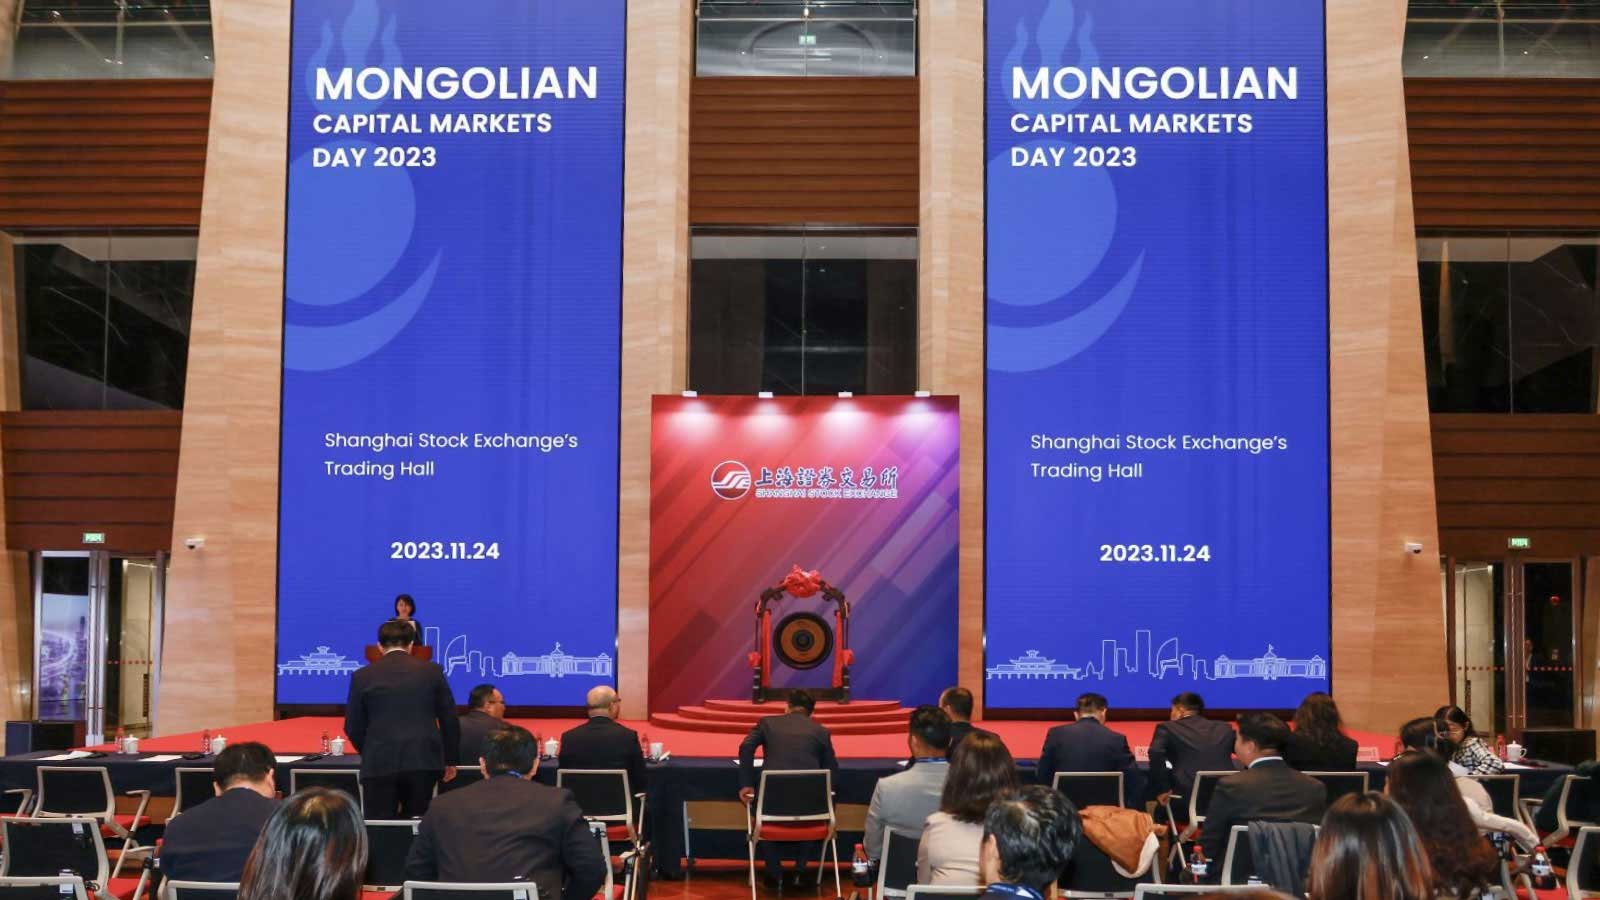 Strengthening financial ties: insights from the Mongolian Capital Markets Day in Shanghai